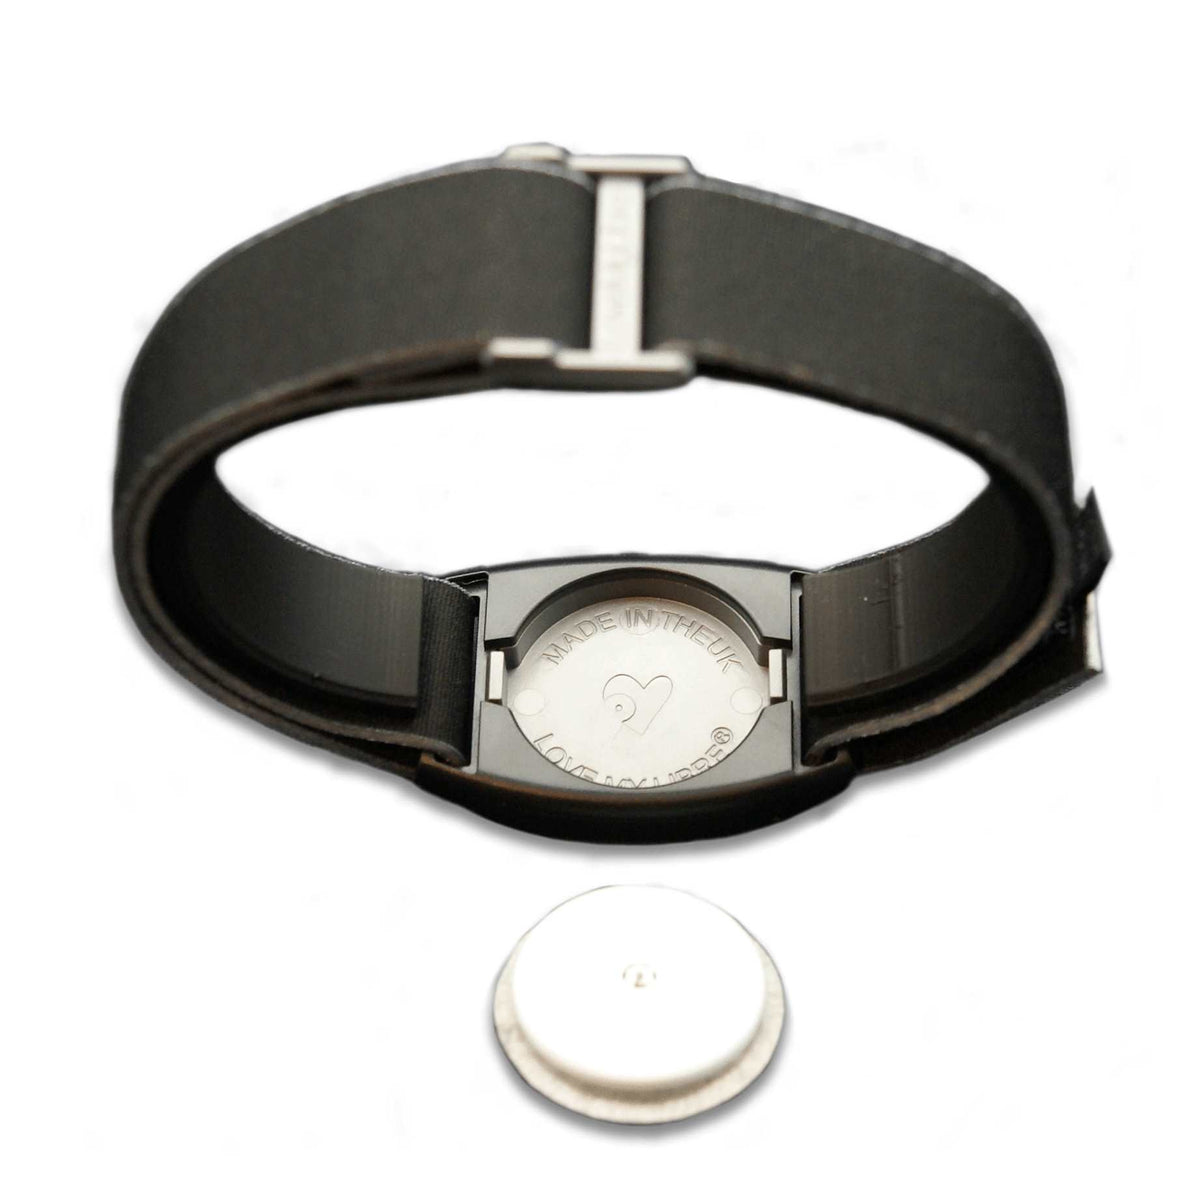 Reverse image of Libreband in pewter and black. Protection for FreeStyle Libre sensor, shown on image.